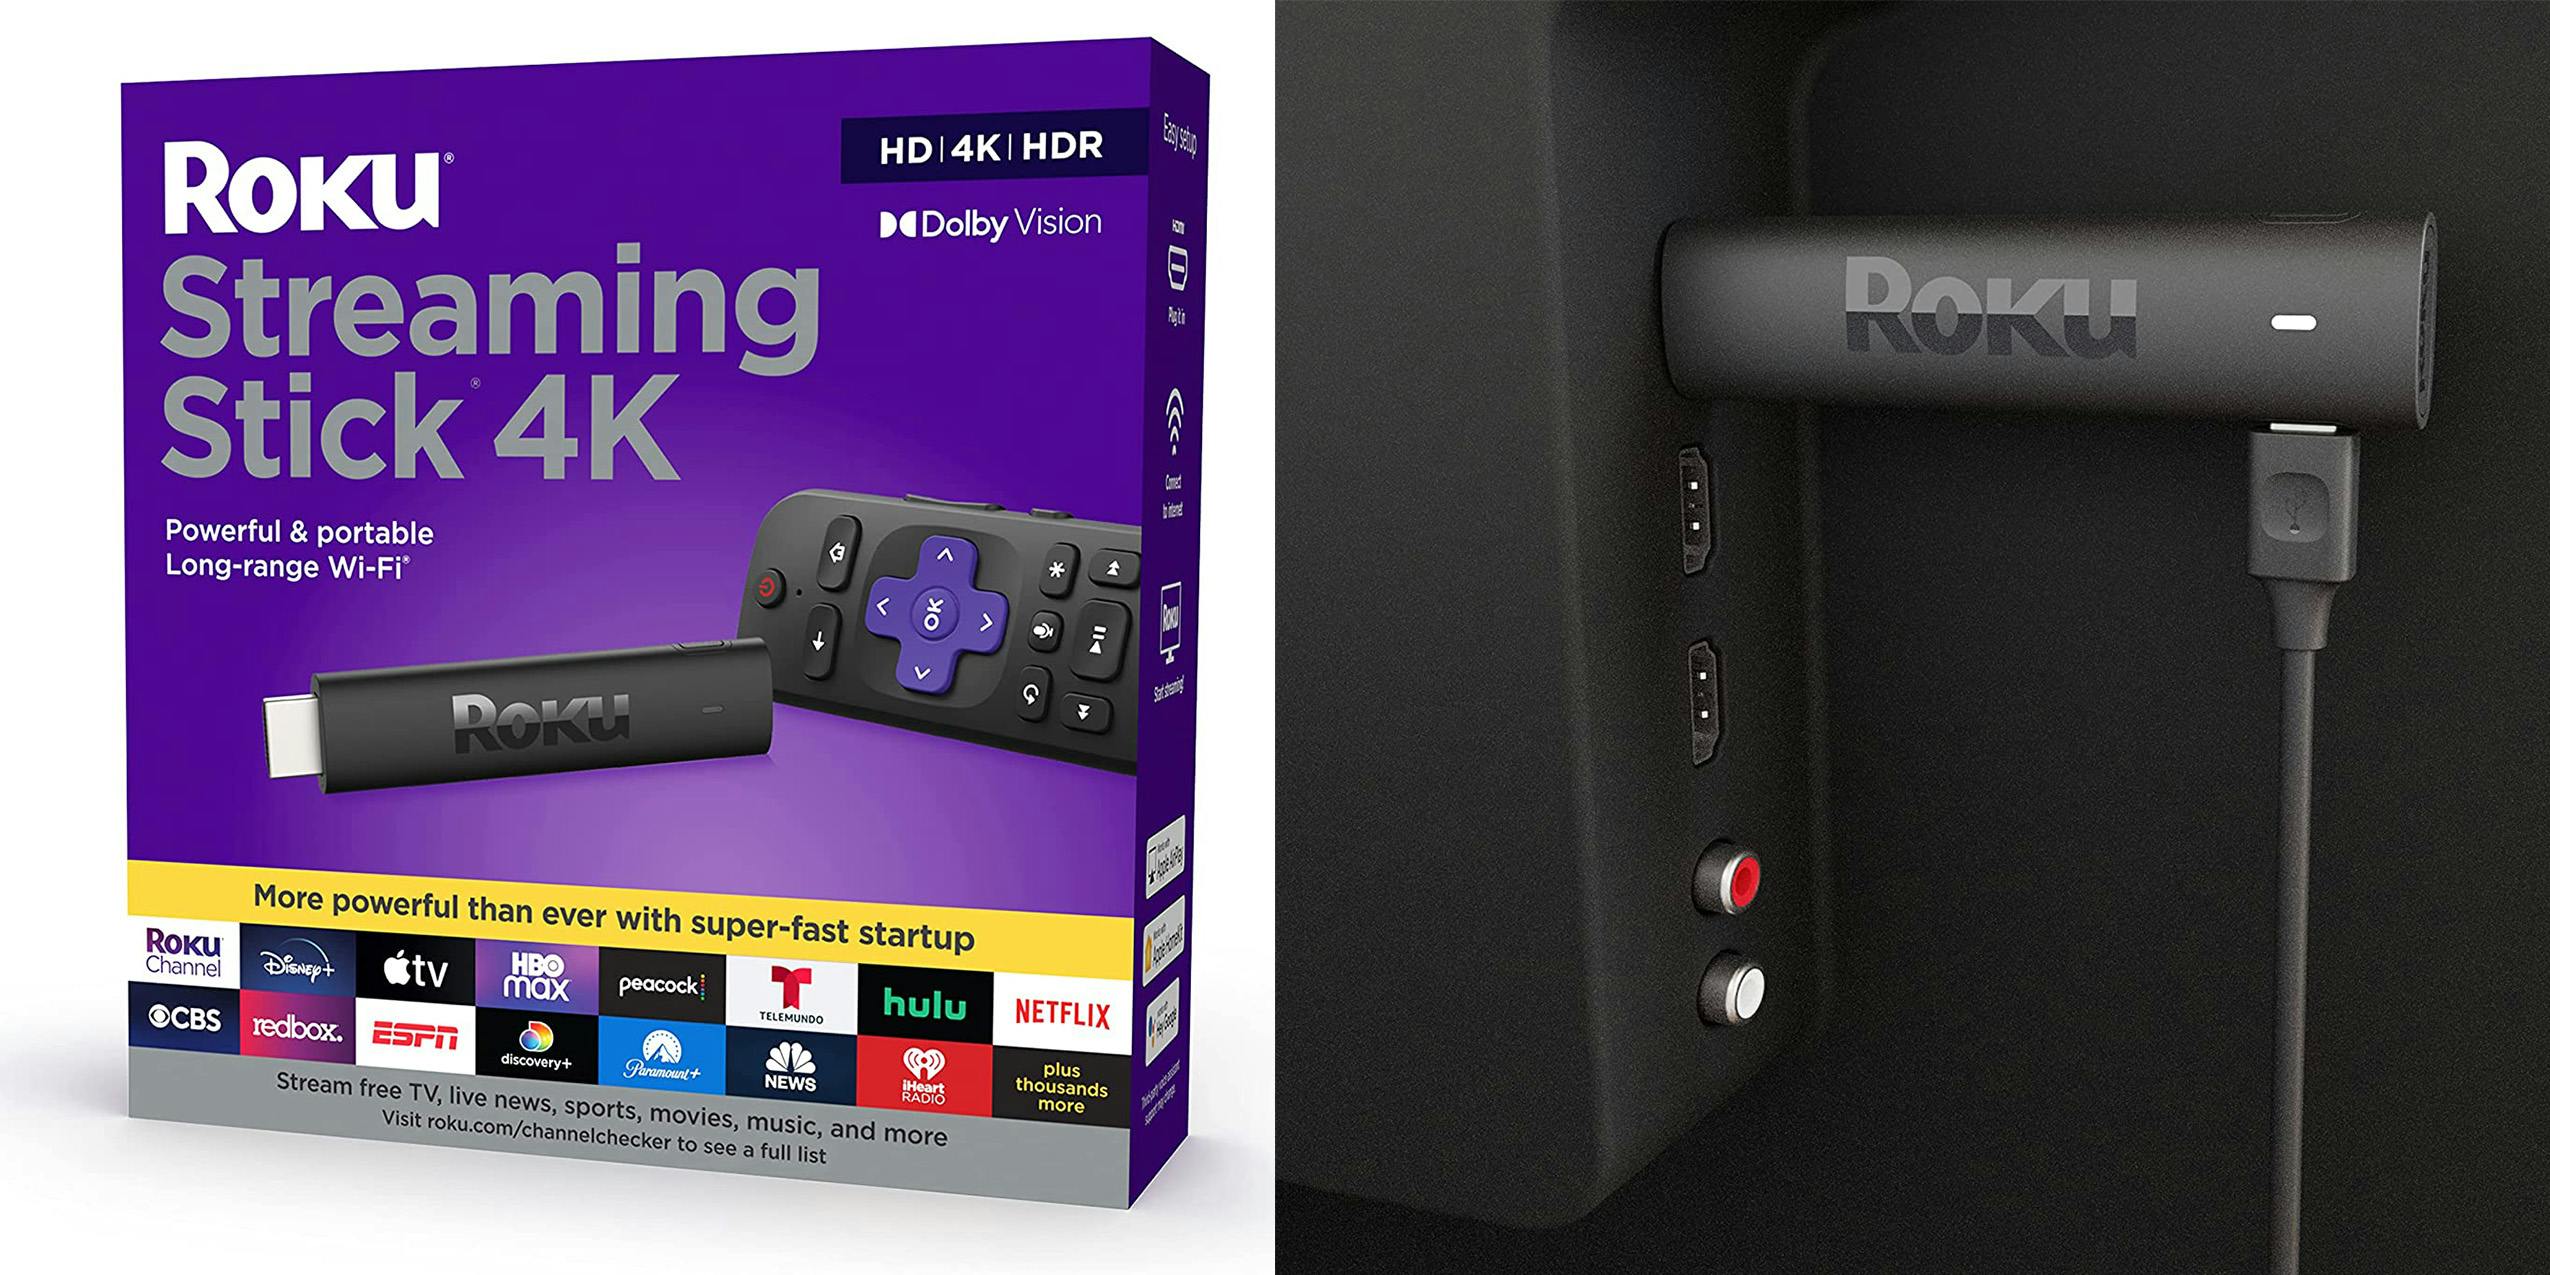 Roku Streaming Stick 4K product image and what the device looks like plugged into a television.